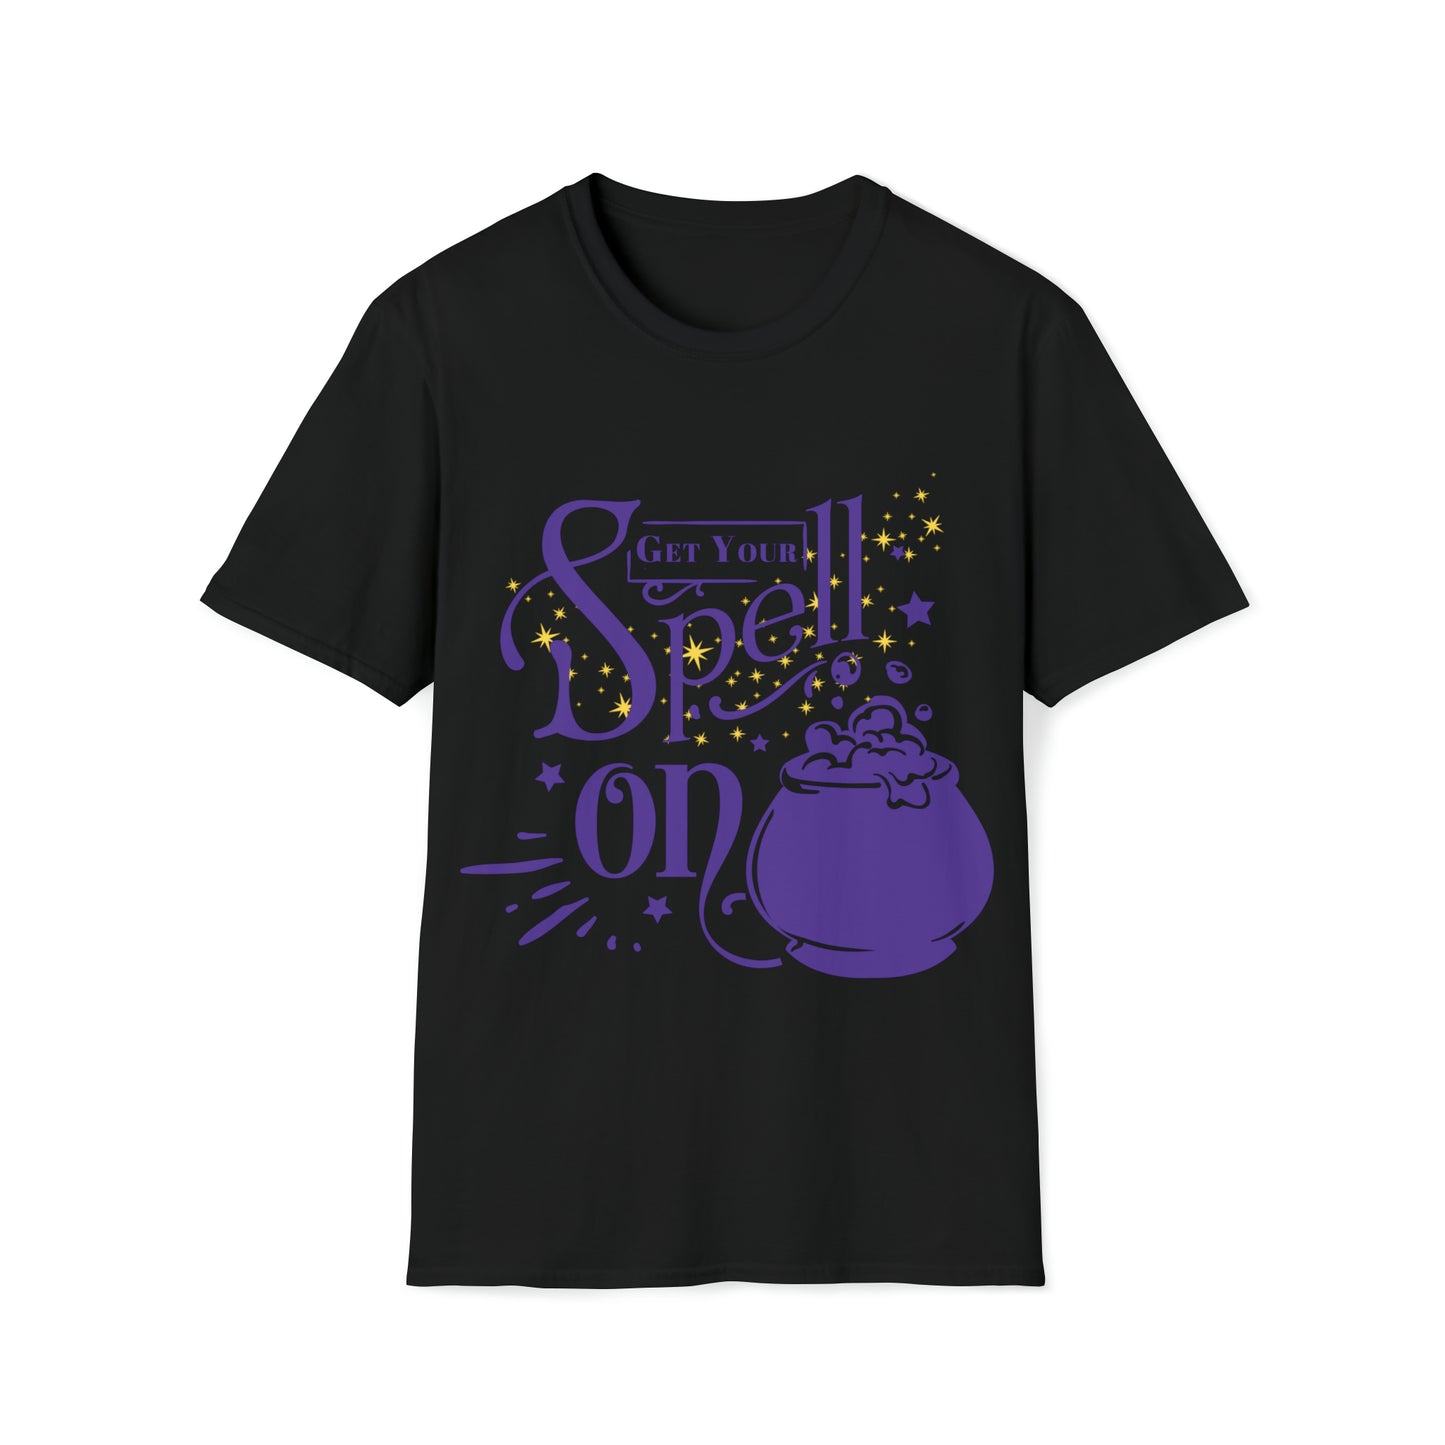 Get Your Spell On - Unisex Softstyle T-Shirt